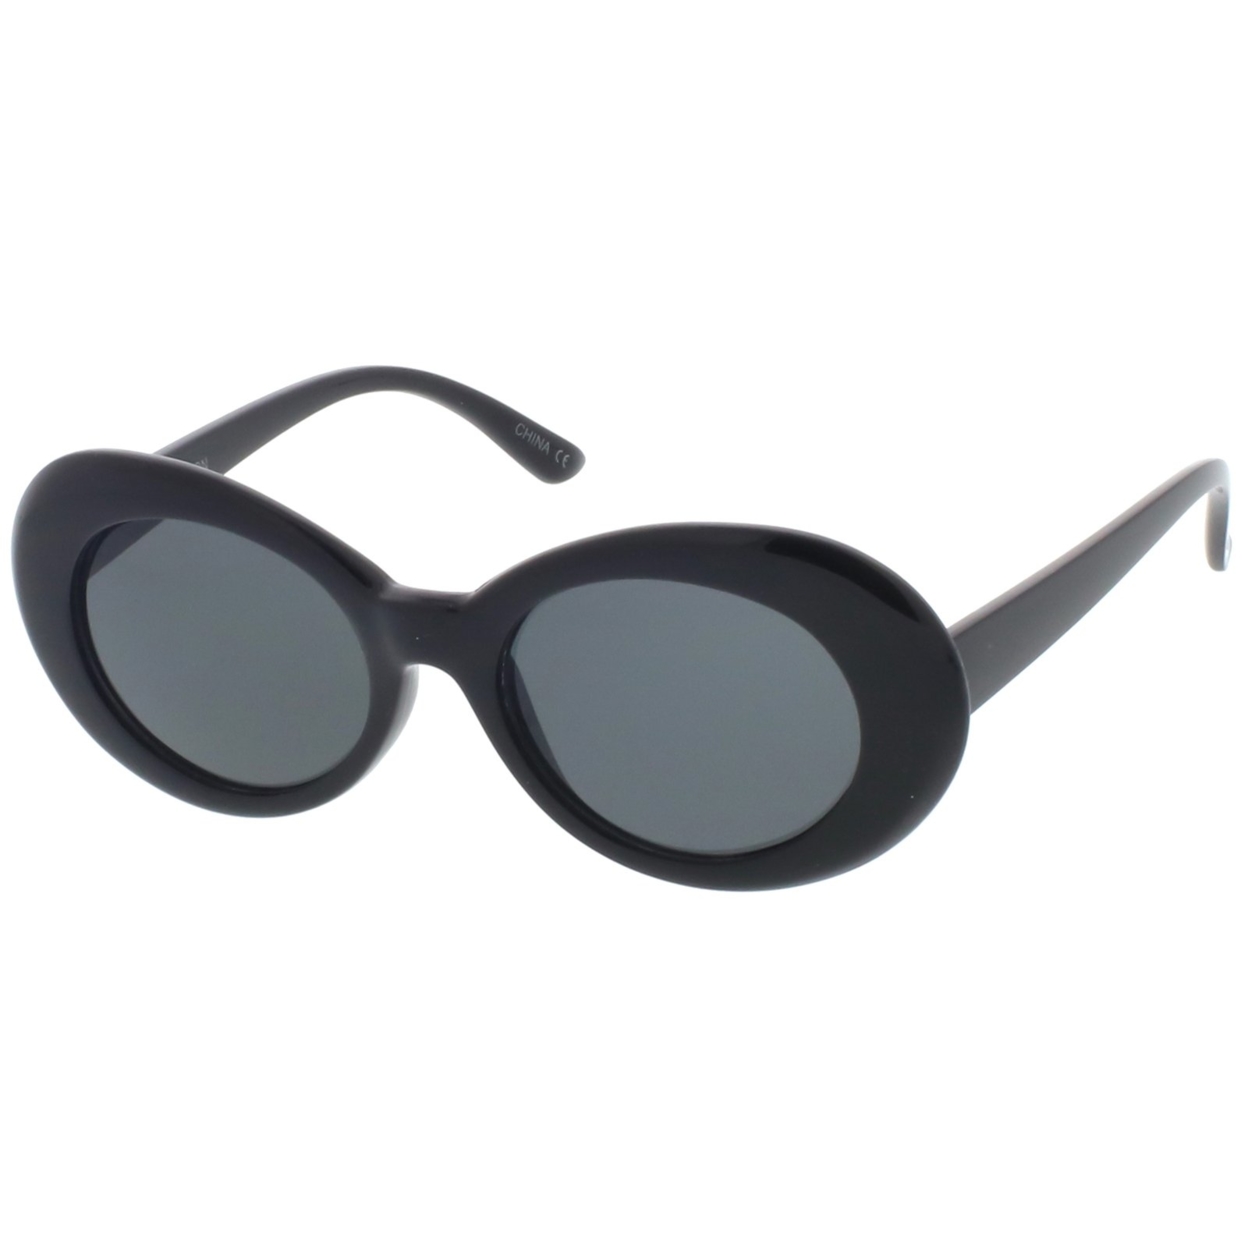 Retro Oval Sunglasses With Tapered Arms Neutral Colored Round Lens 51mm - Black / Smoke